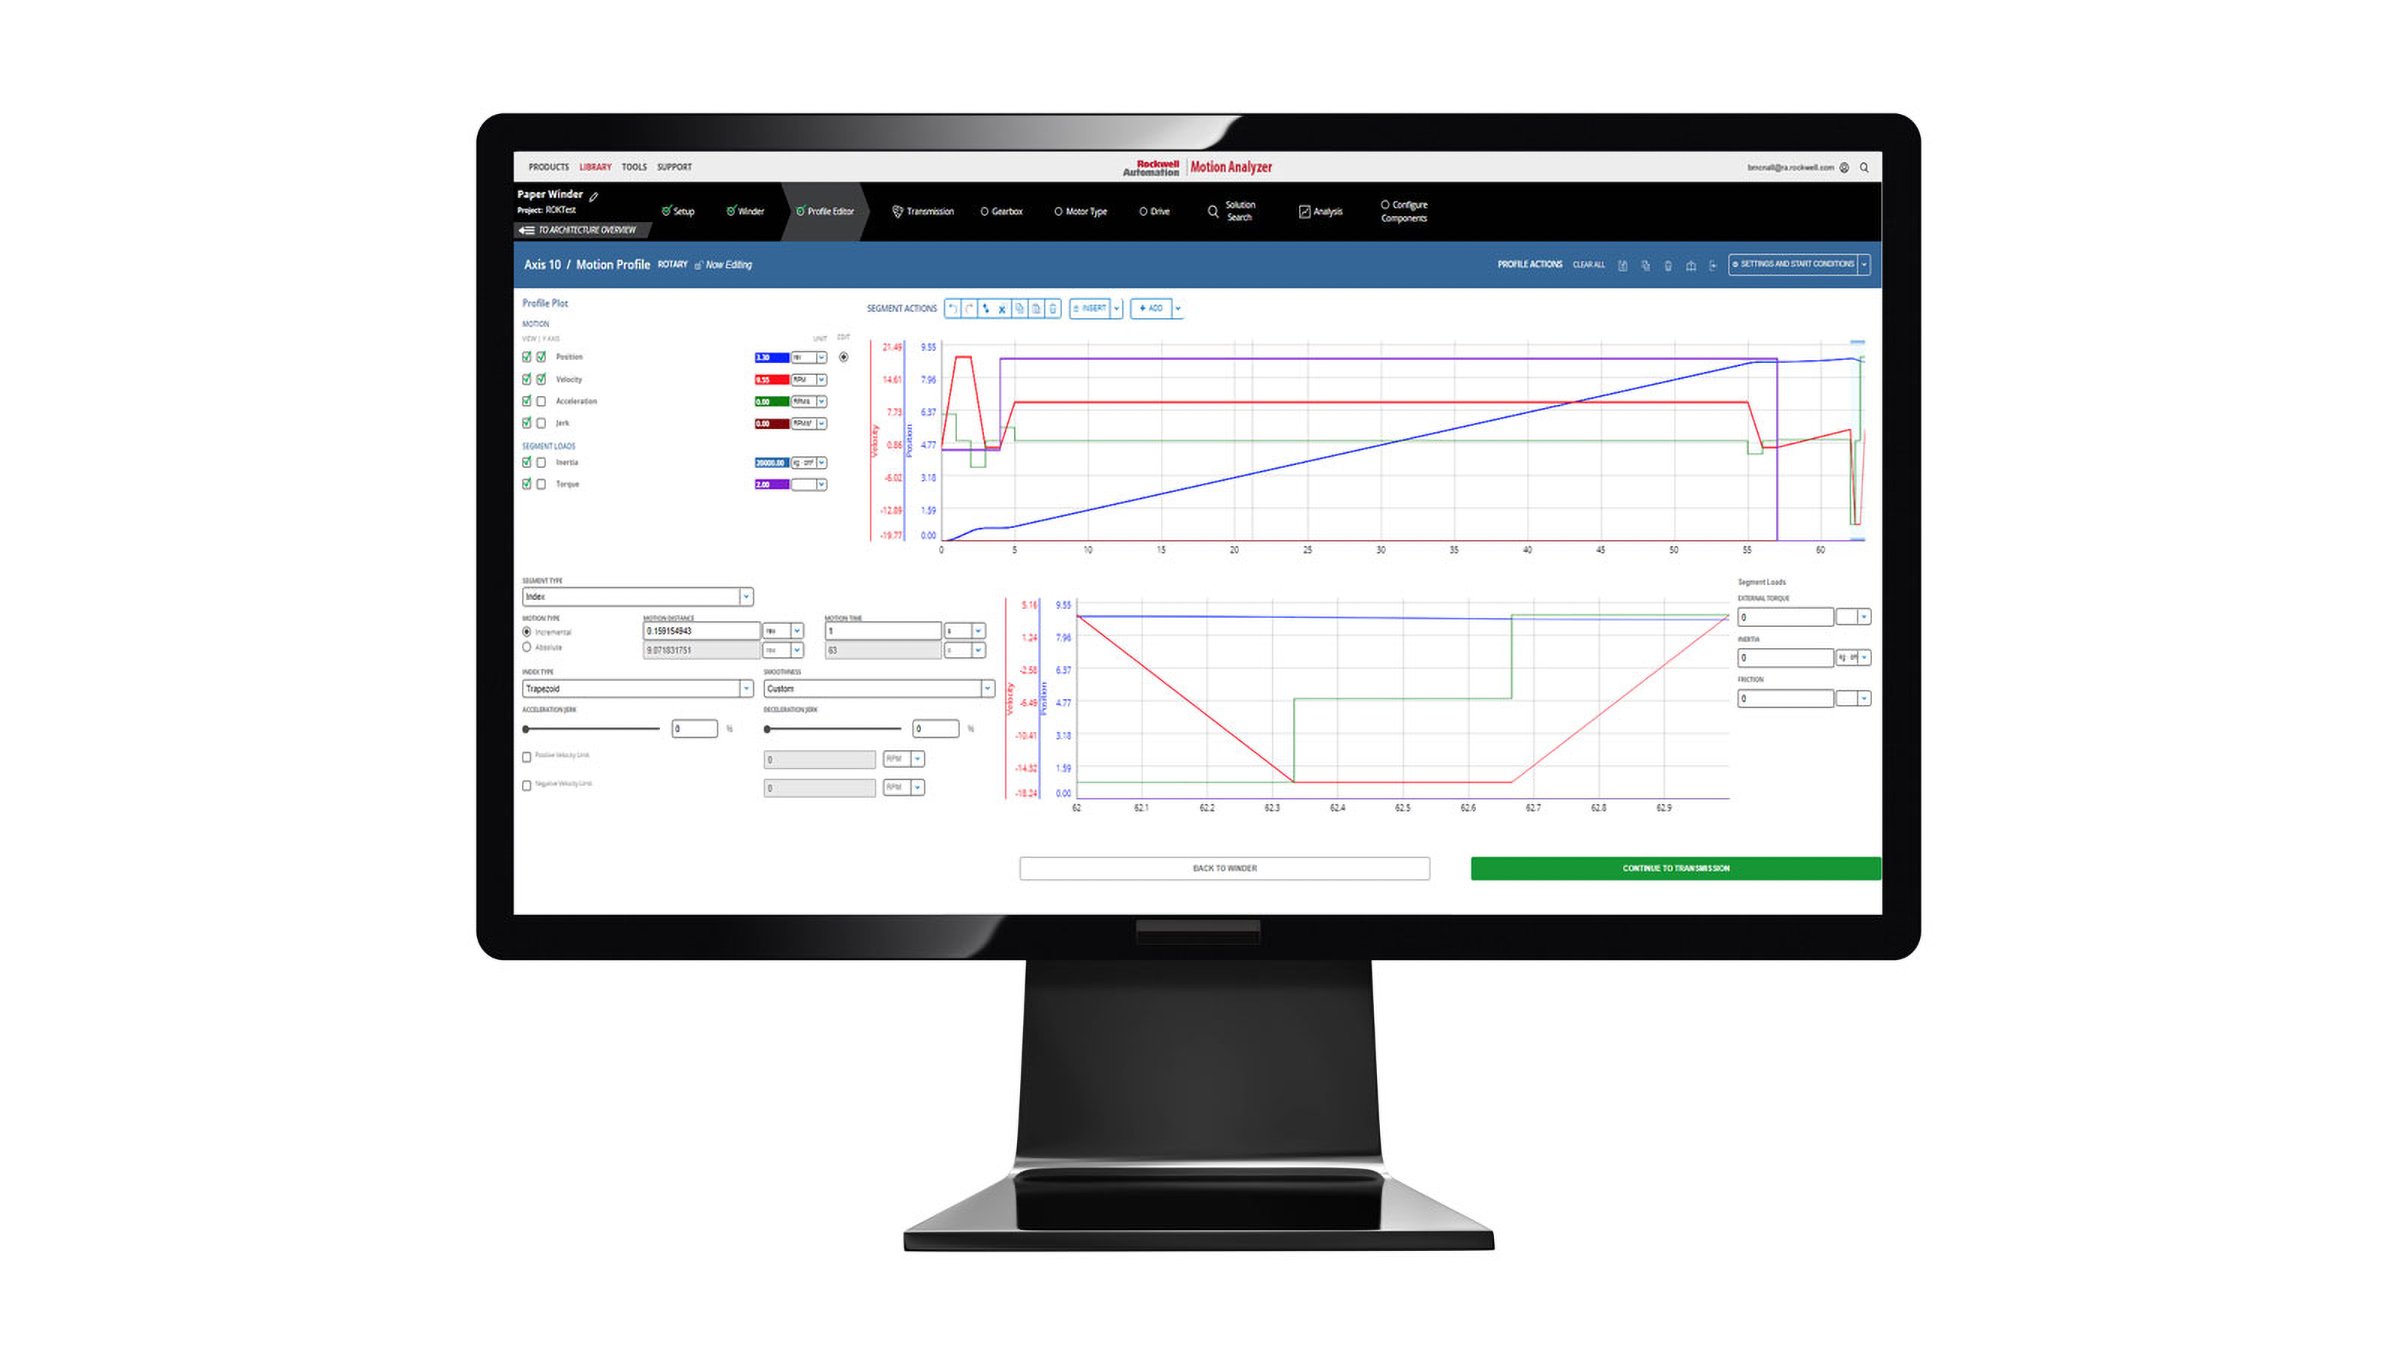 Motion Analyzer software is a comprehensive motion-application sizing tool used for analysis, optimization, selection and validation of your Kinetix® motion control system.